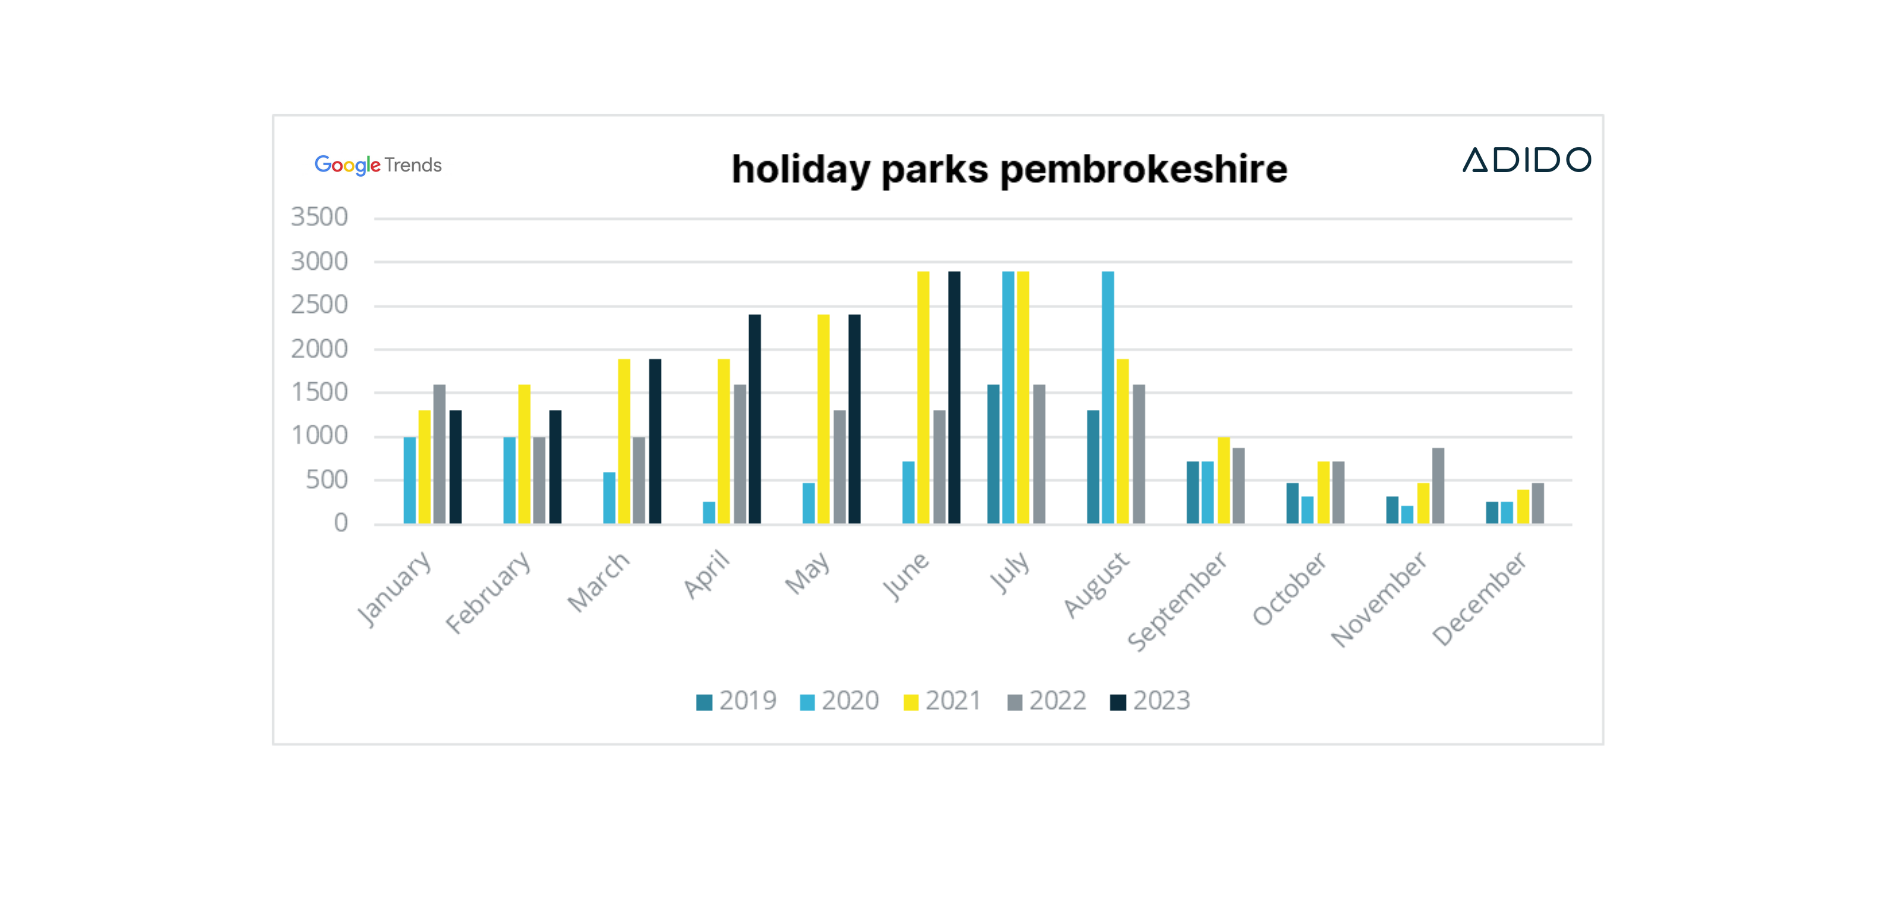 Holiday parks pembrokeshire search trend 2019 2023